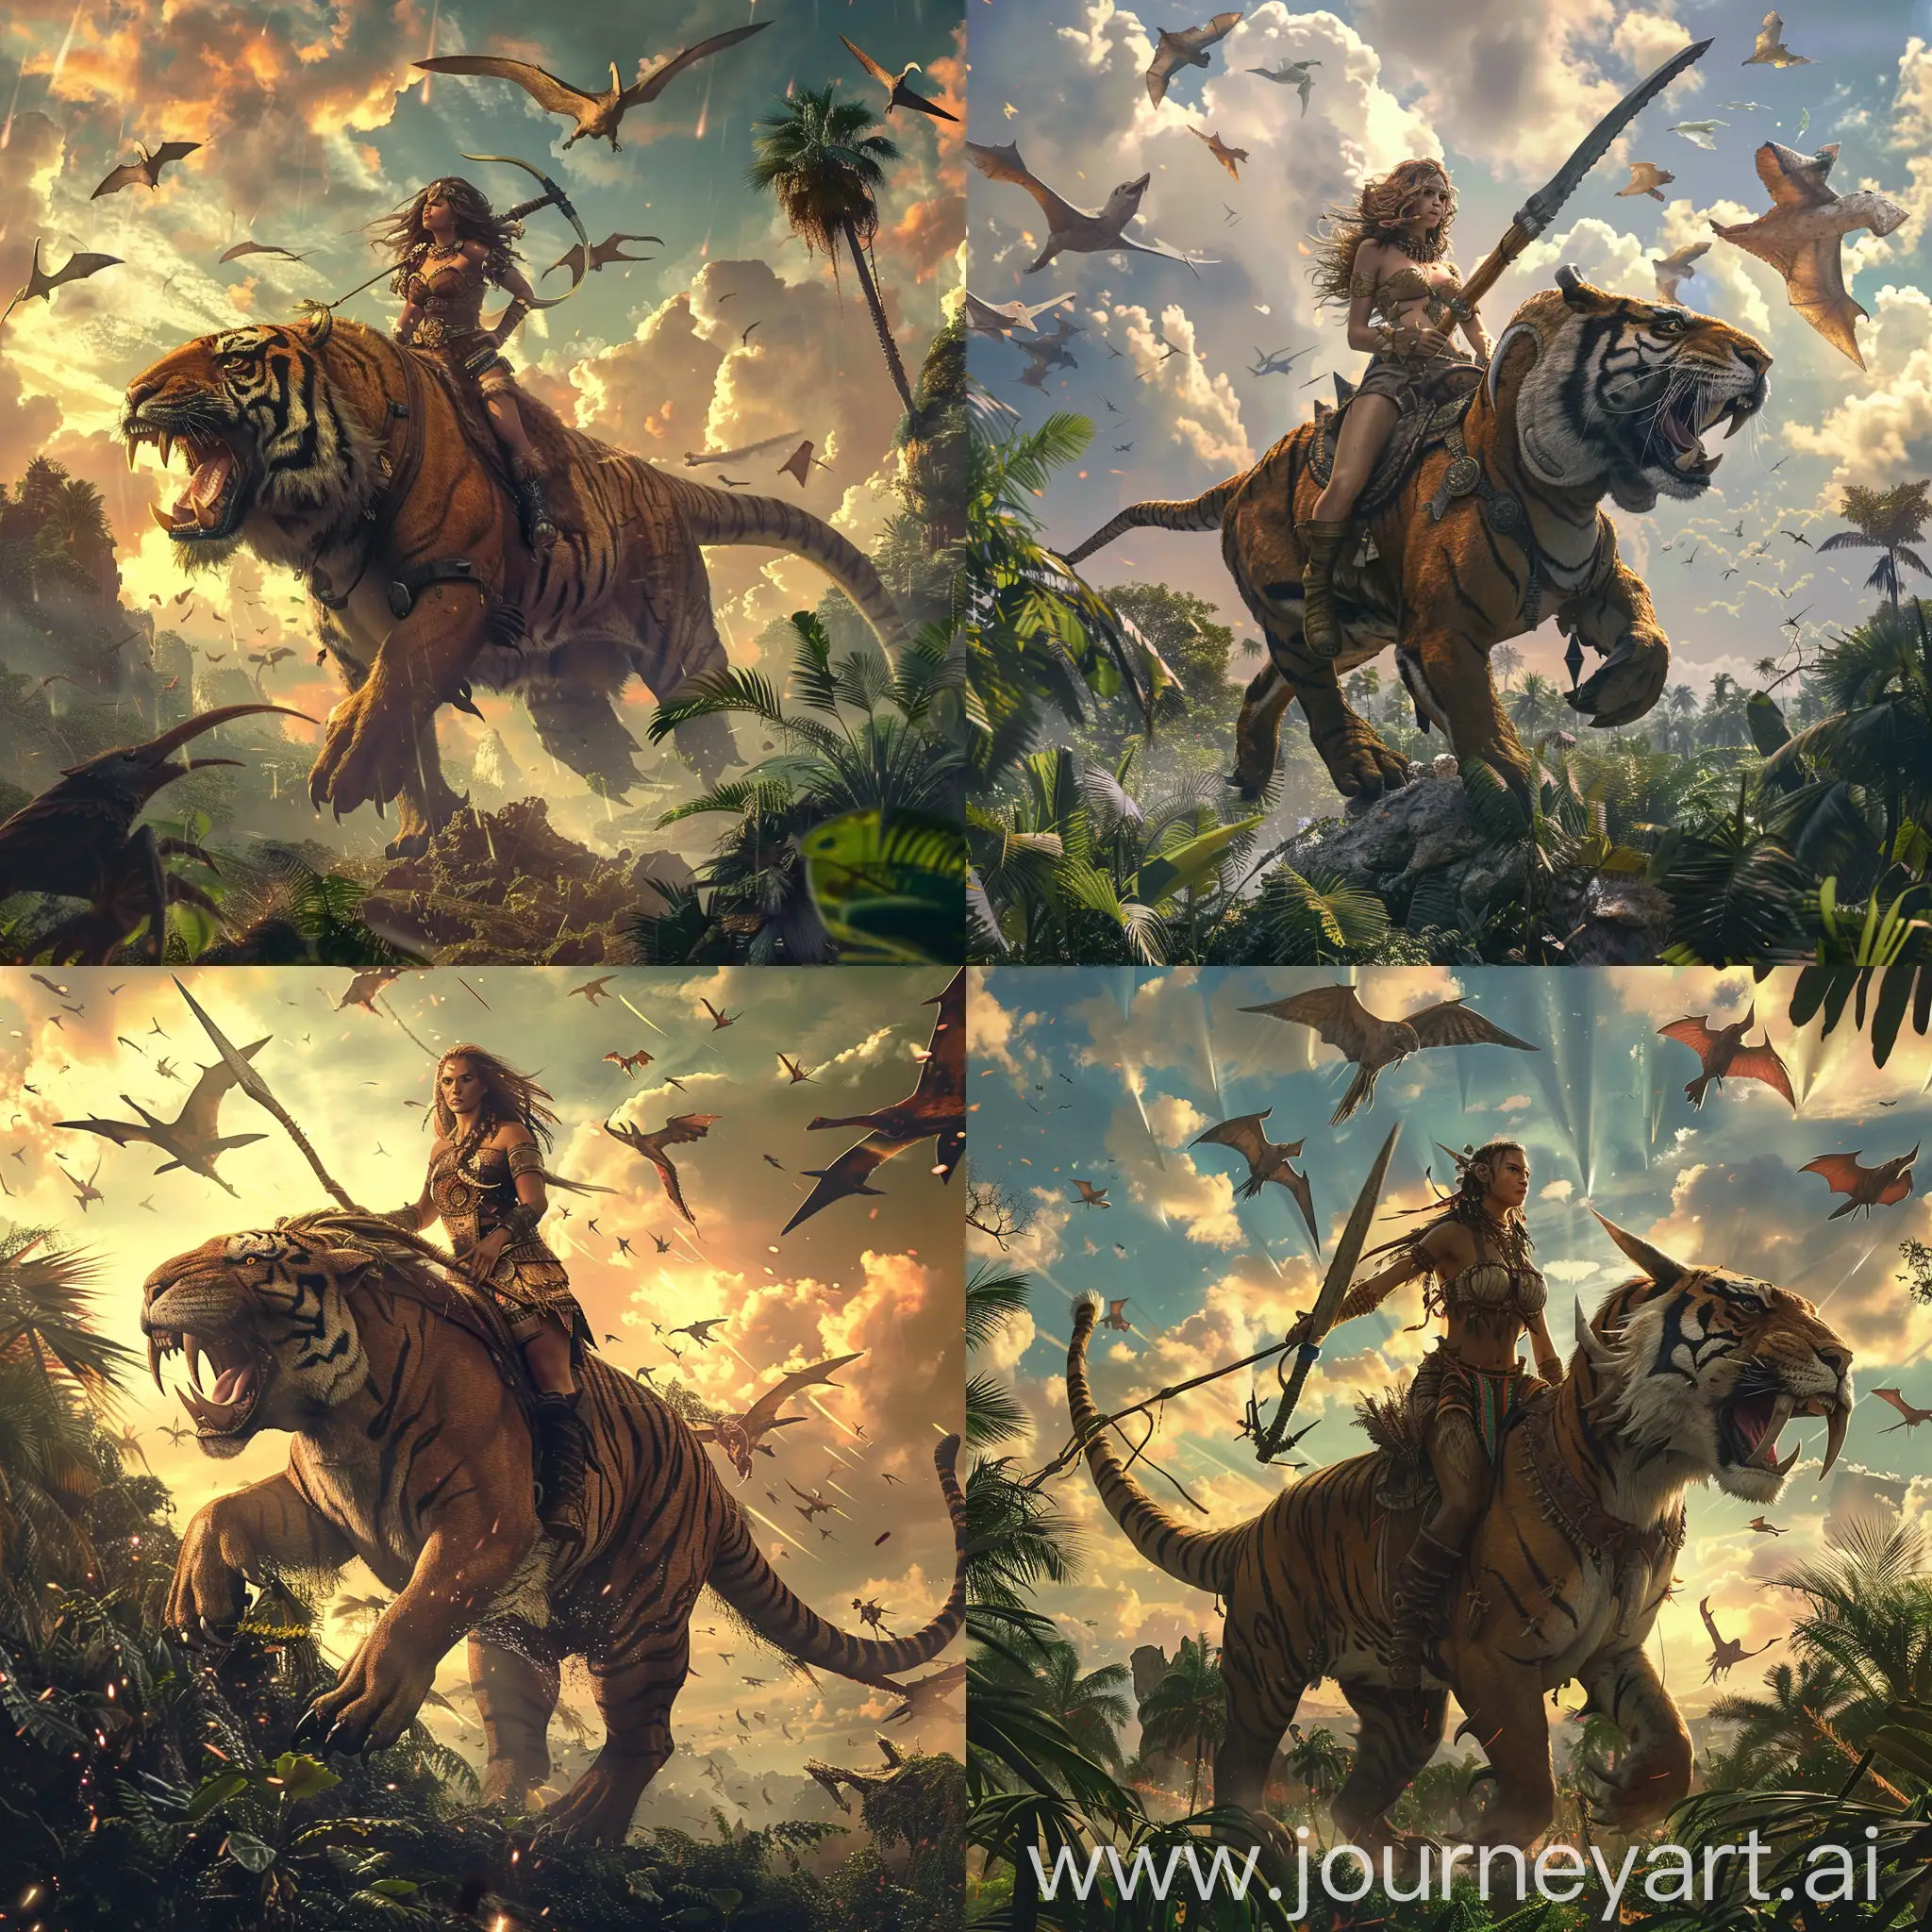 Fantasy-Female-Warrior-Riding-Saber-Tooth-Tiger-in-Lush-Jungle